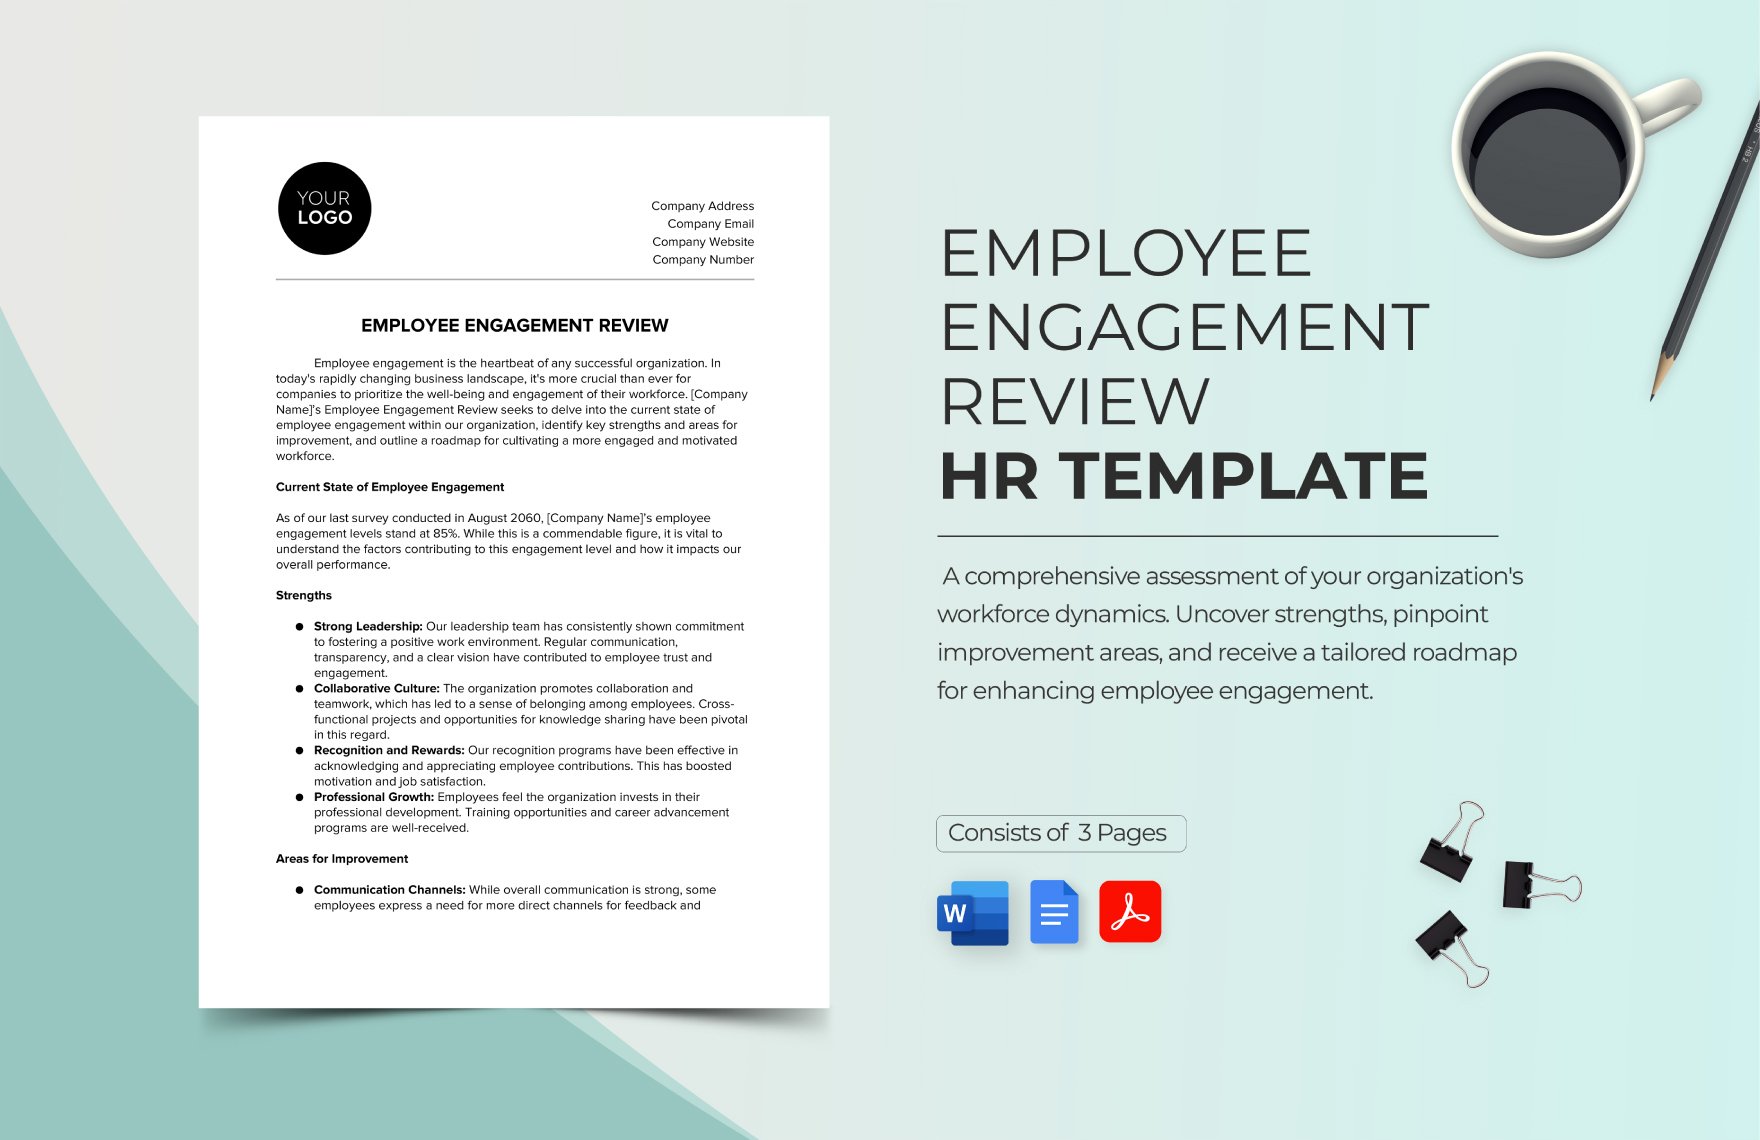 Employee Engagement Review HR Template in Word, Google Docs, PDF